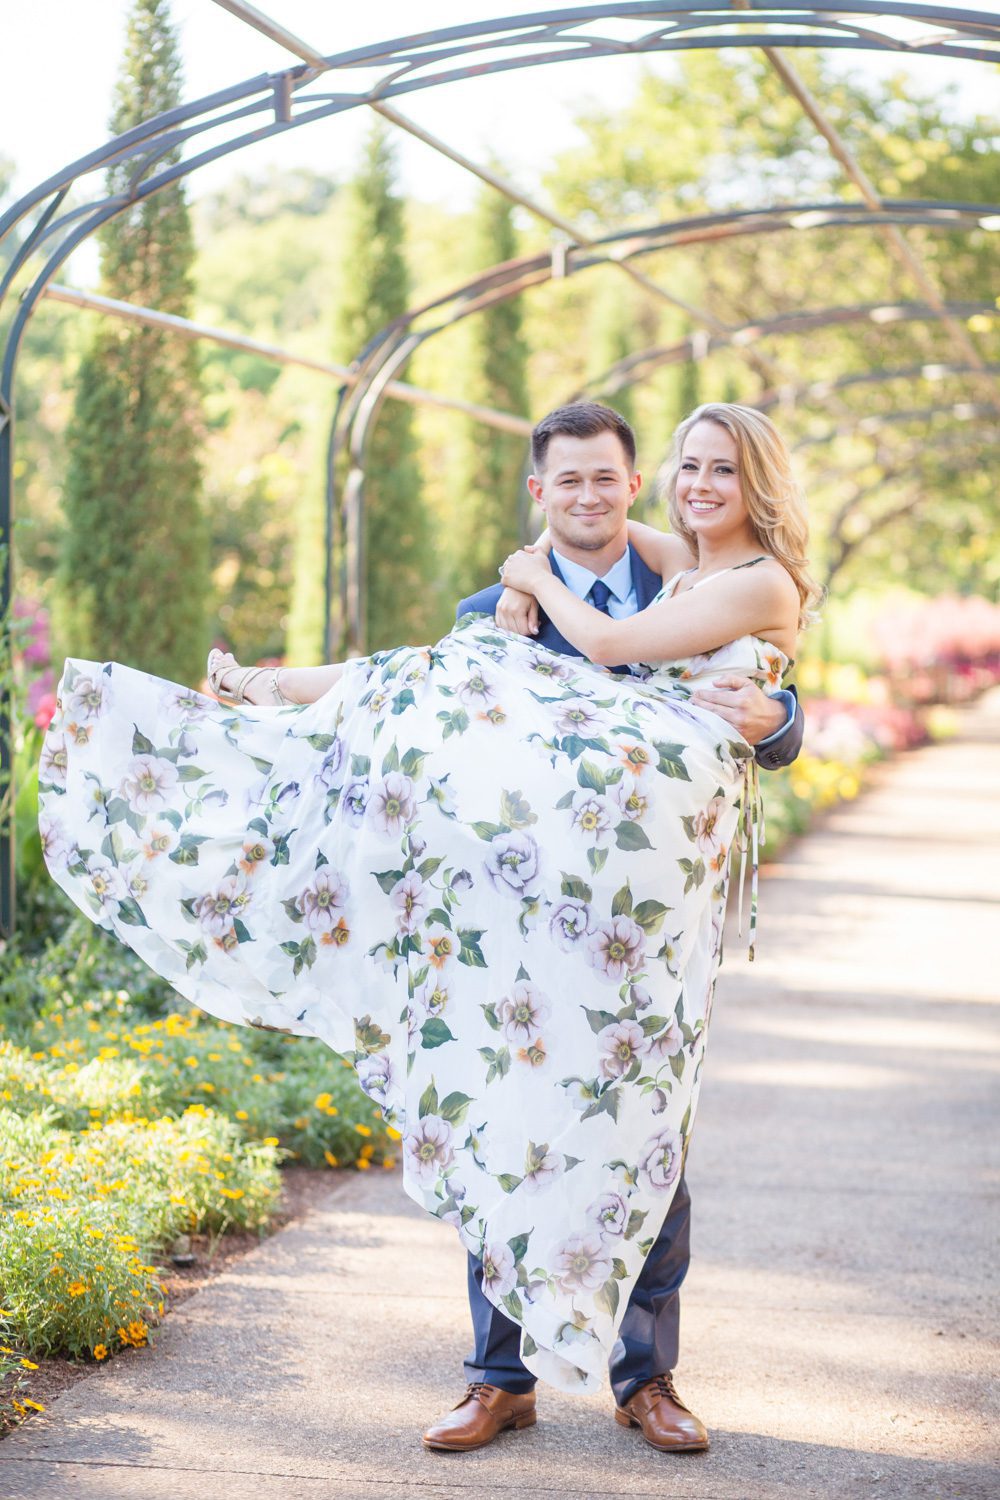 engagement session at cheekwood estate and gardens photo by krista lee photography, couple under pergola arbor